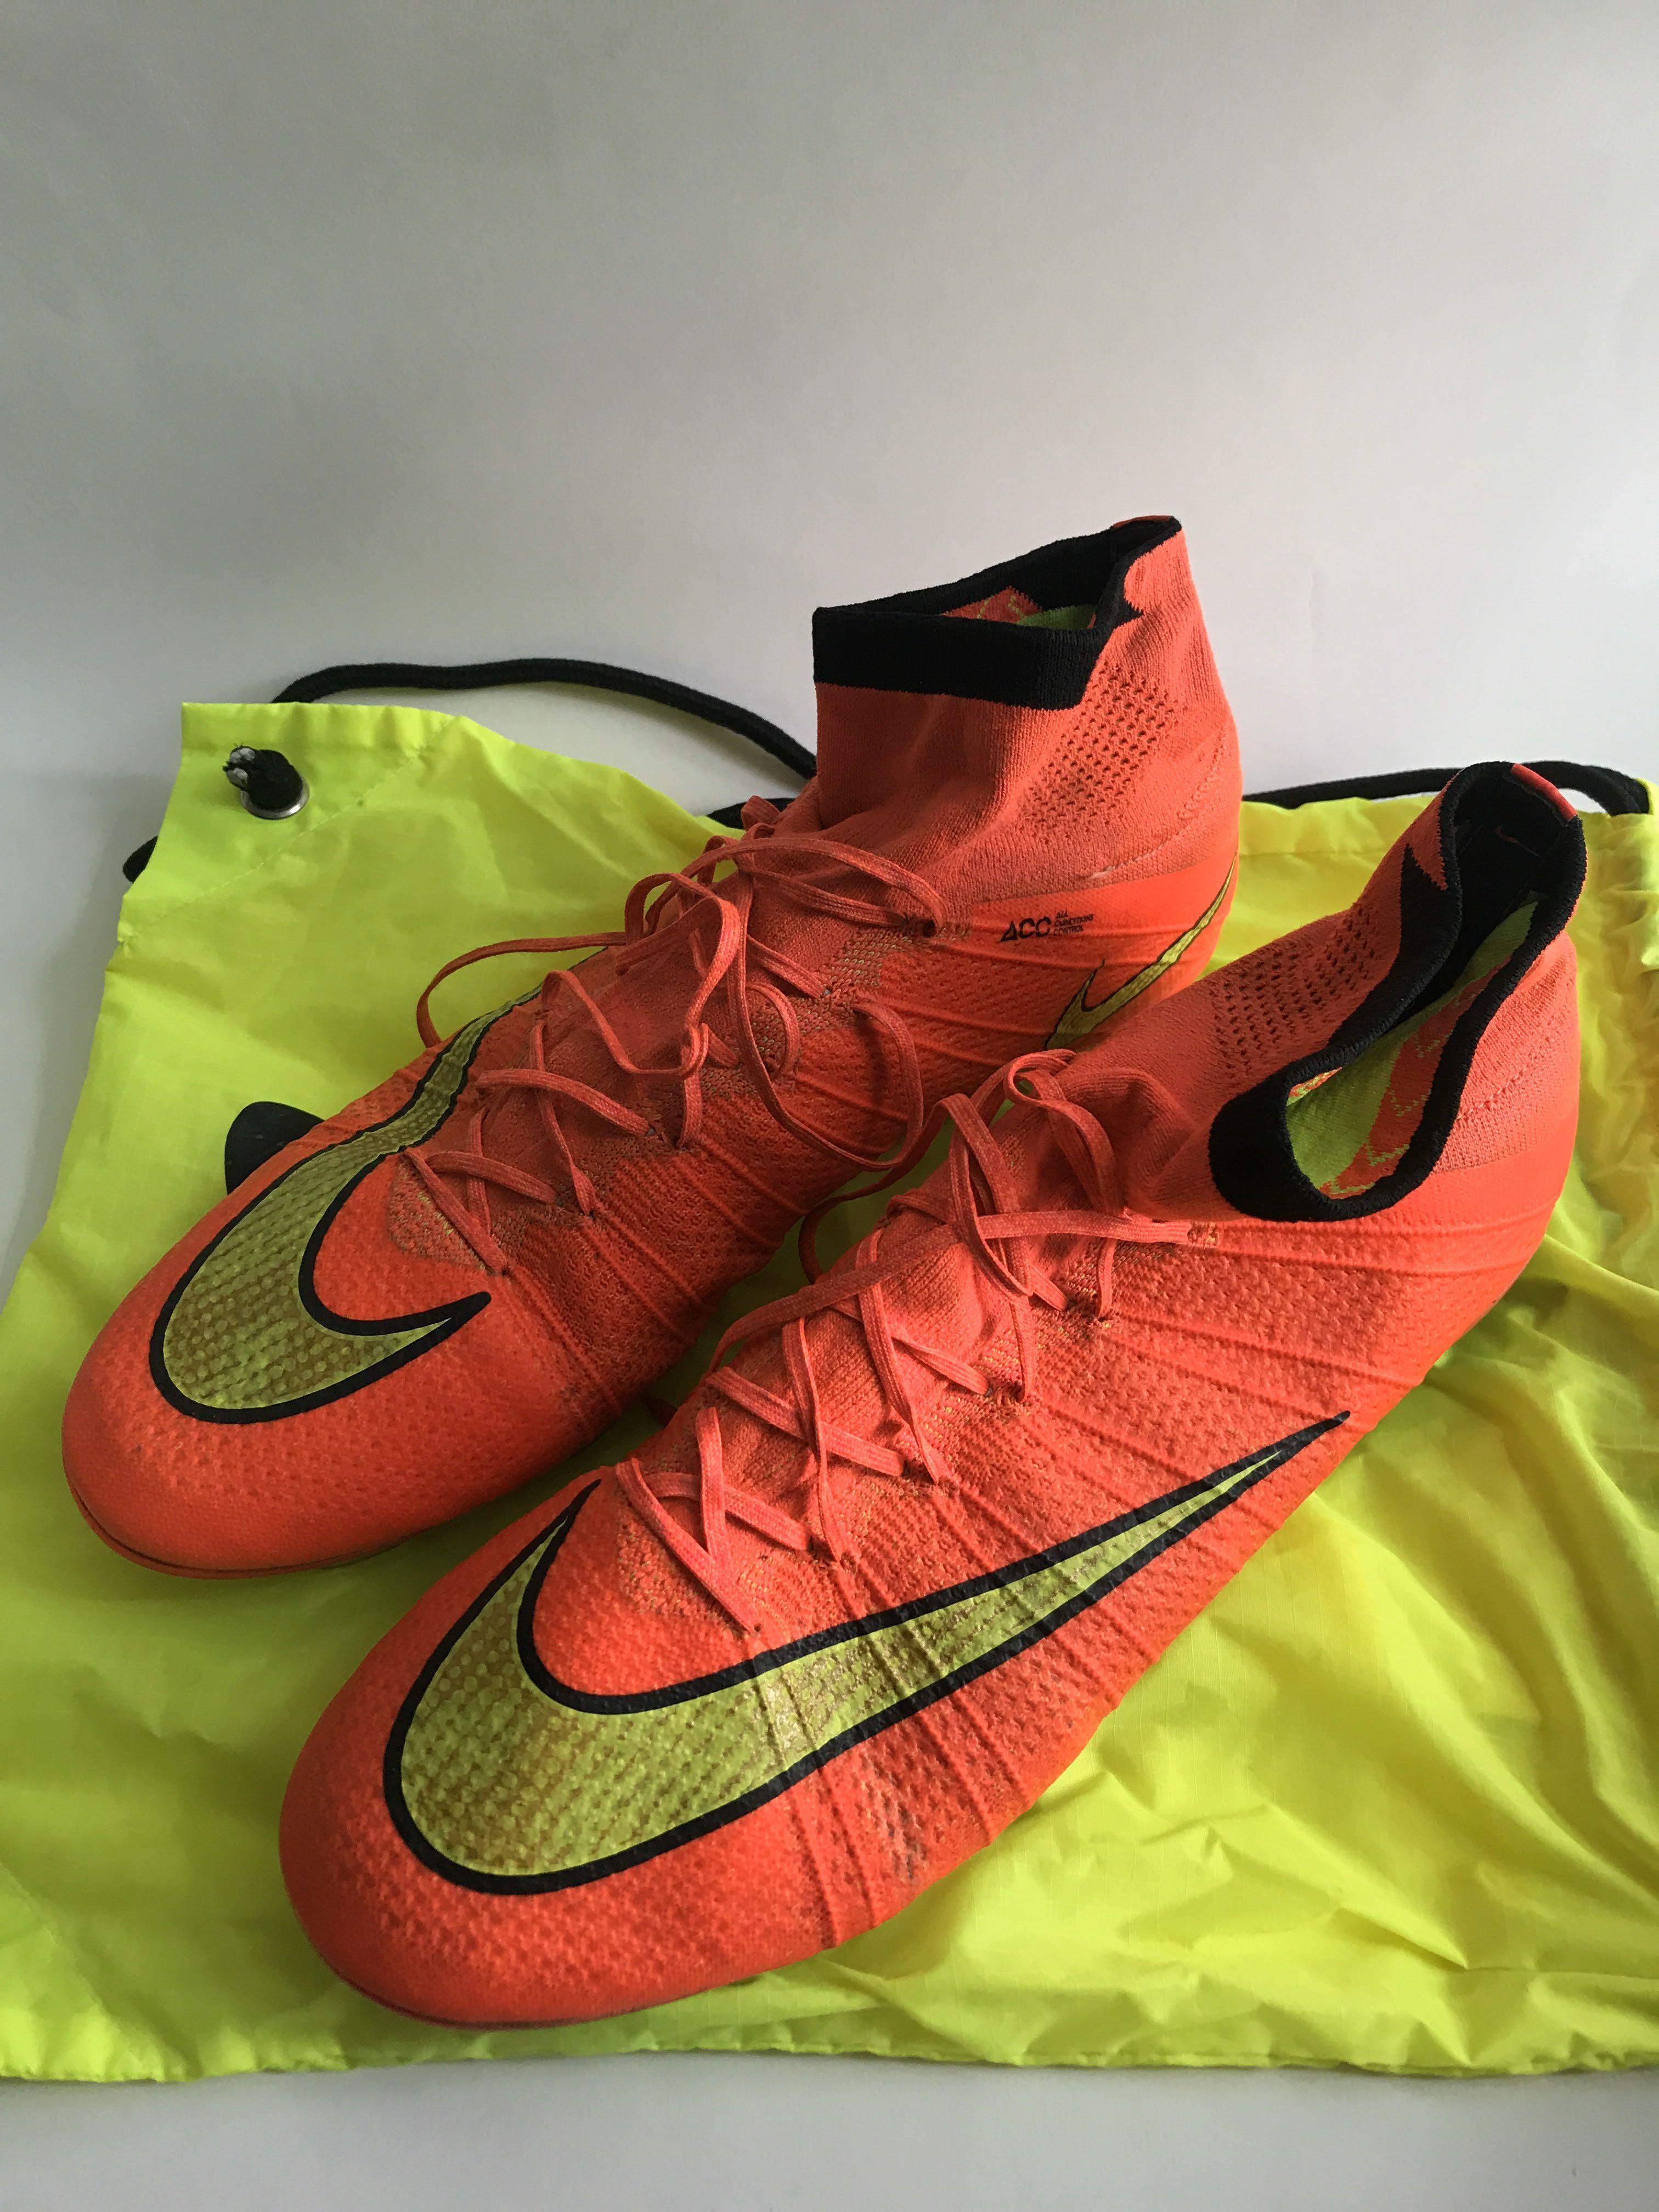 Nike Mercurial Vapor 4 2014 soccer boots, Sports Equipment, Sports & Games, Racket & Ball Sports on Carousell